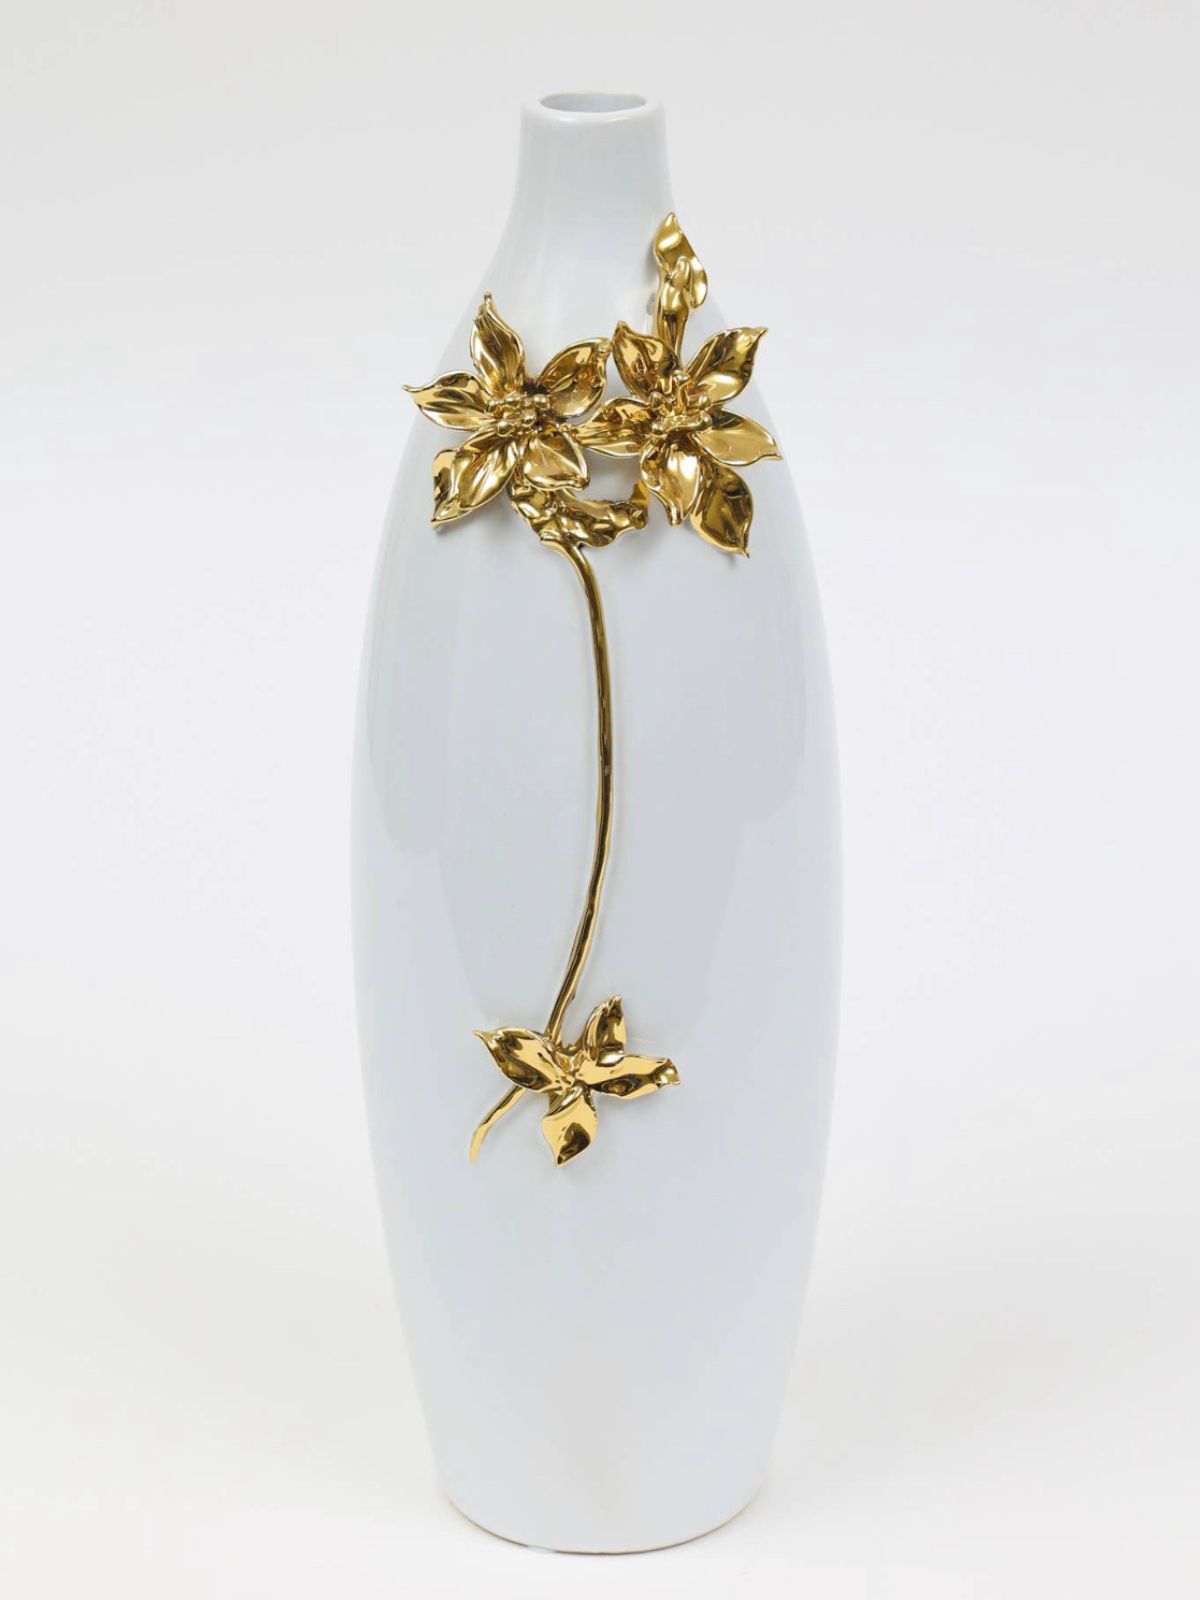 18 inch Tall White Vase with Gold Tone Flower Petals Design.